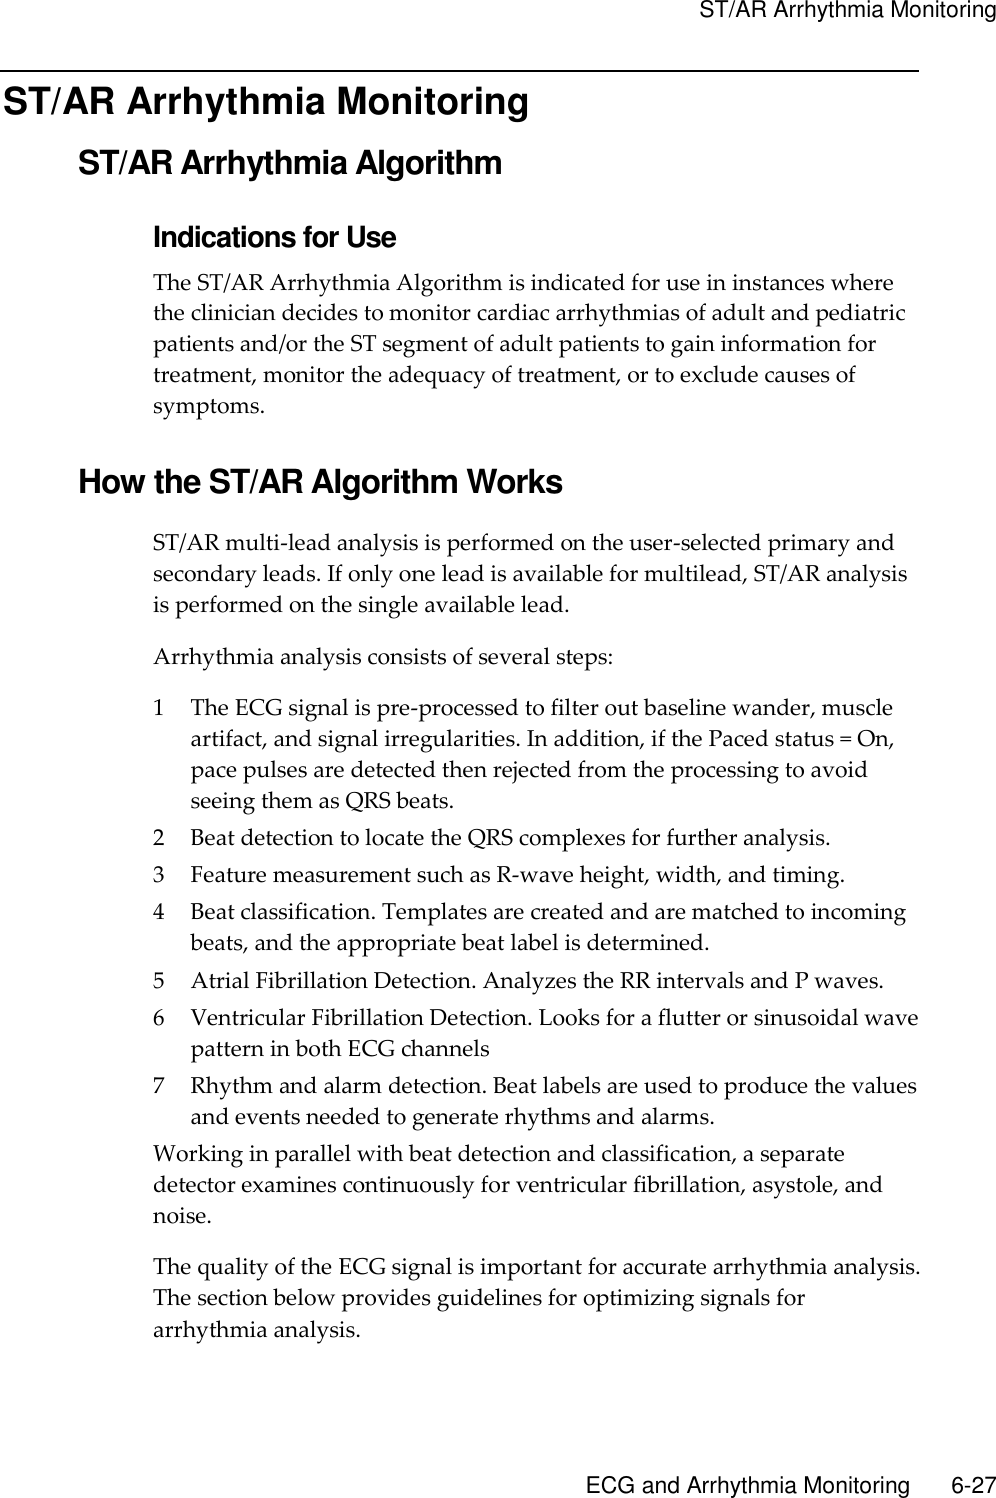     ST/AR Arrhythmia Monitoring       ECG and Arrhythmia Monitoring        6-27 ST/AR Arrhythmia Monitoring ST/AR Arrhythmia Algorithm Indications for Use The ST/AR Arrhythmia Algorithm is indicated for use in instances where the clinician decides to monitor cardiac arrhythmias of adult and pediatric patients and/or the ST segment of adult patients to gain information for treatment, monitor the adequacy of treatment, or to exclude causes of symptoms.  How the ST/AR Algorithm Works ST/AR multi-lead analysis is performed on the user-selected primary and secondary leads. If only one lead is available for multilead, ST/AR analysis is performed on the single available lead. Arrhythmia analysis consists of several steps: 1 The ECG signal is pre-processed to filter out baseline wander, muscle artifact, and signal irregularities. In addition, if the Paced status = On, pace pulses are detected then rejected from the processing to avoid seeing them as QRS beats. 2 Beat detection to locate the QRS complexes for further analysis. 3 Feature measurement such as R-wave height, width, and timing. 4 Beat classification. Templates are created and are matched to incoming beats, and the appropriate beat label is determined. 5 Atrial Fibrillation Detection. Analyzes the RR intervals and P waves. 6 Ventricular Fibrillation Detection. Looks for a flutter or sinusoidal wave pattern in both ECG channels 7 Rhythm and alarm detection. Beat labels are used to produce the values and events needed to generate rhythms and alarms. Working in parallel with beat detection and classification, a separate detector examines continuously for ventricular fibrillation, asystole, and noise. The quality of the ECG signal is important for accurate arrhythmia analysis. The section below provides guidelines for optimizing signals for arrhythmia analysis. 